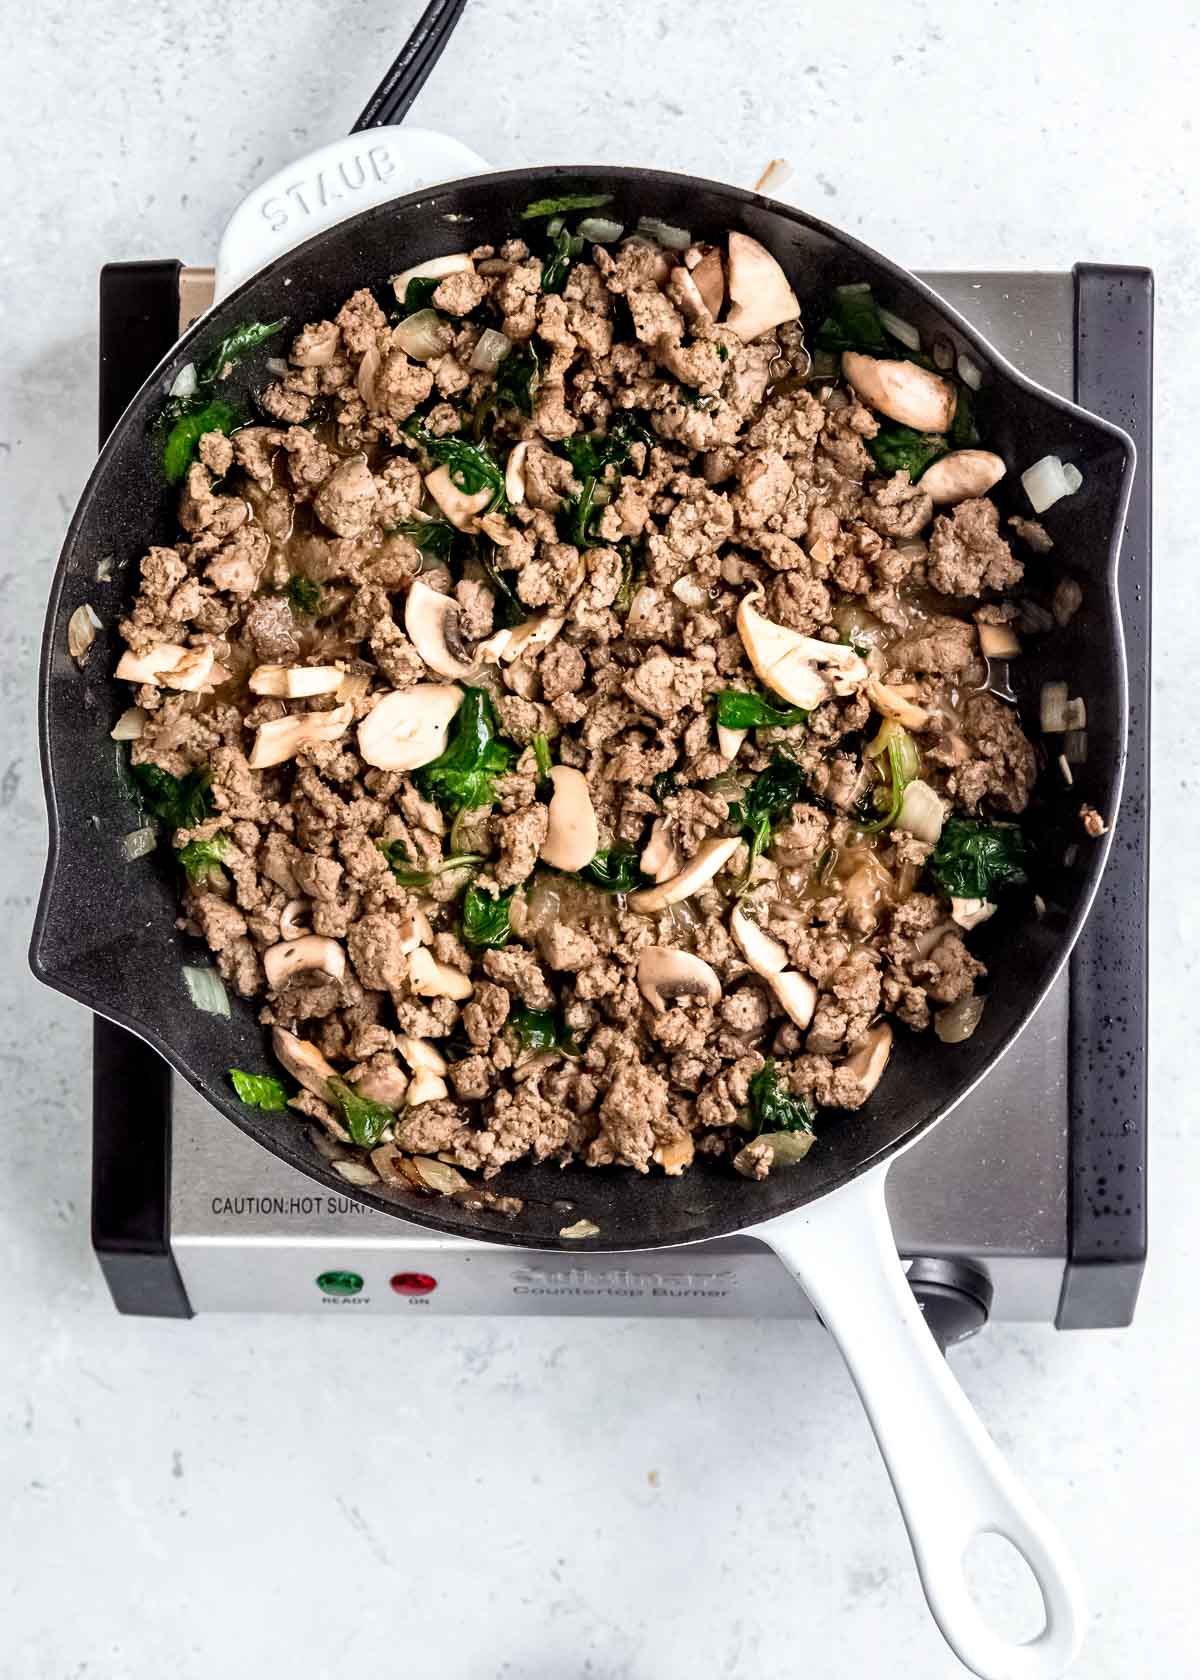 cooked breakfast sausage, mushrooms, and spinach in black skillet